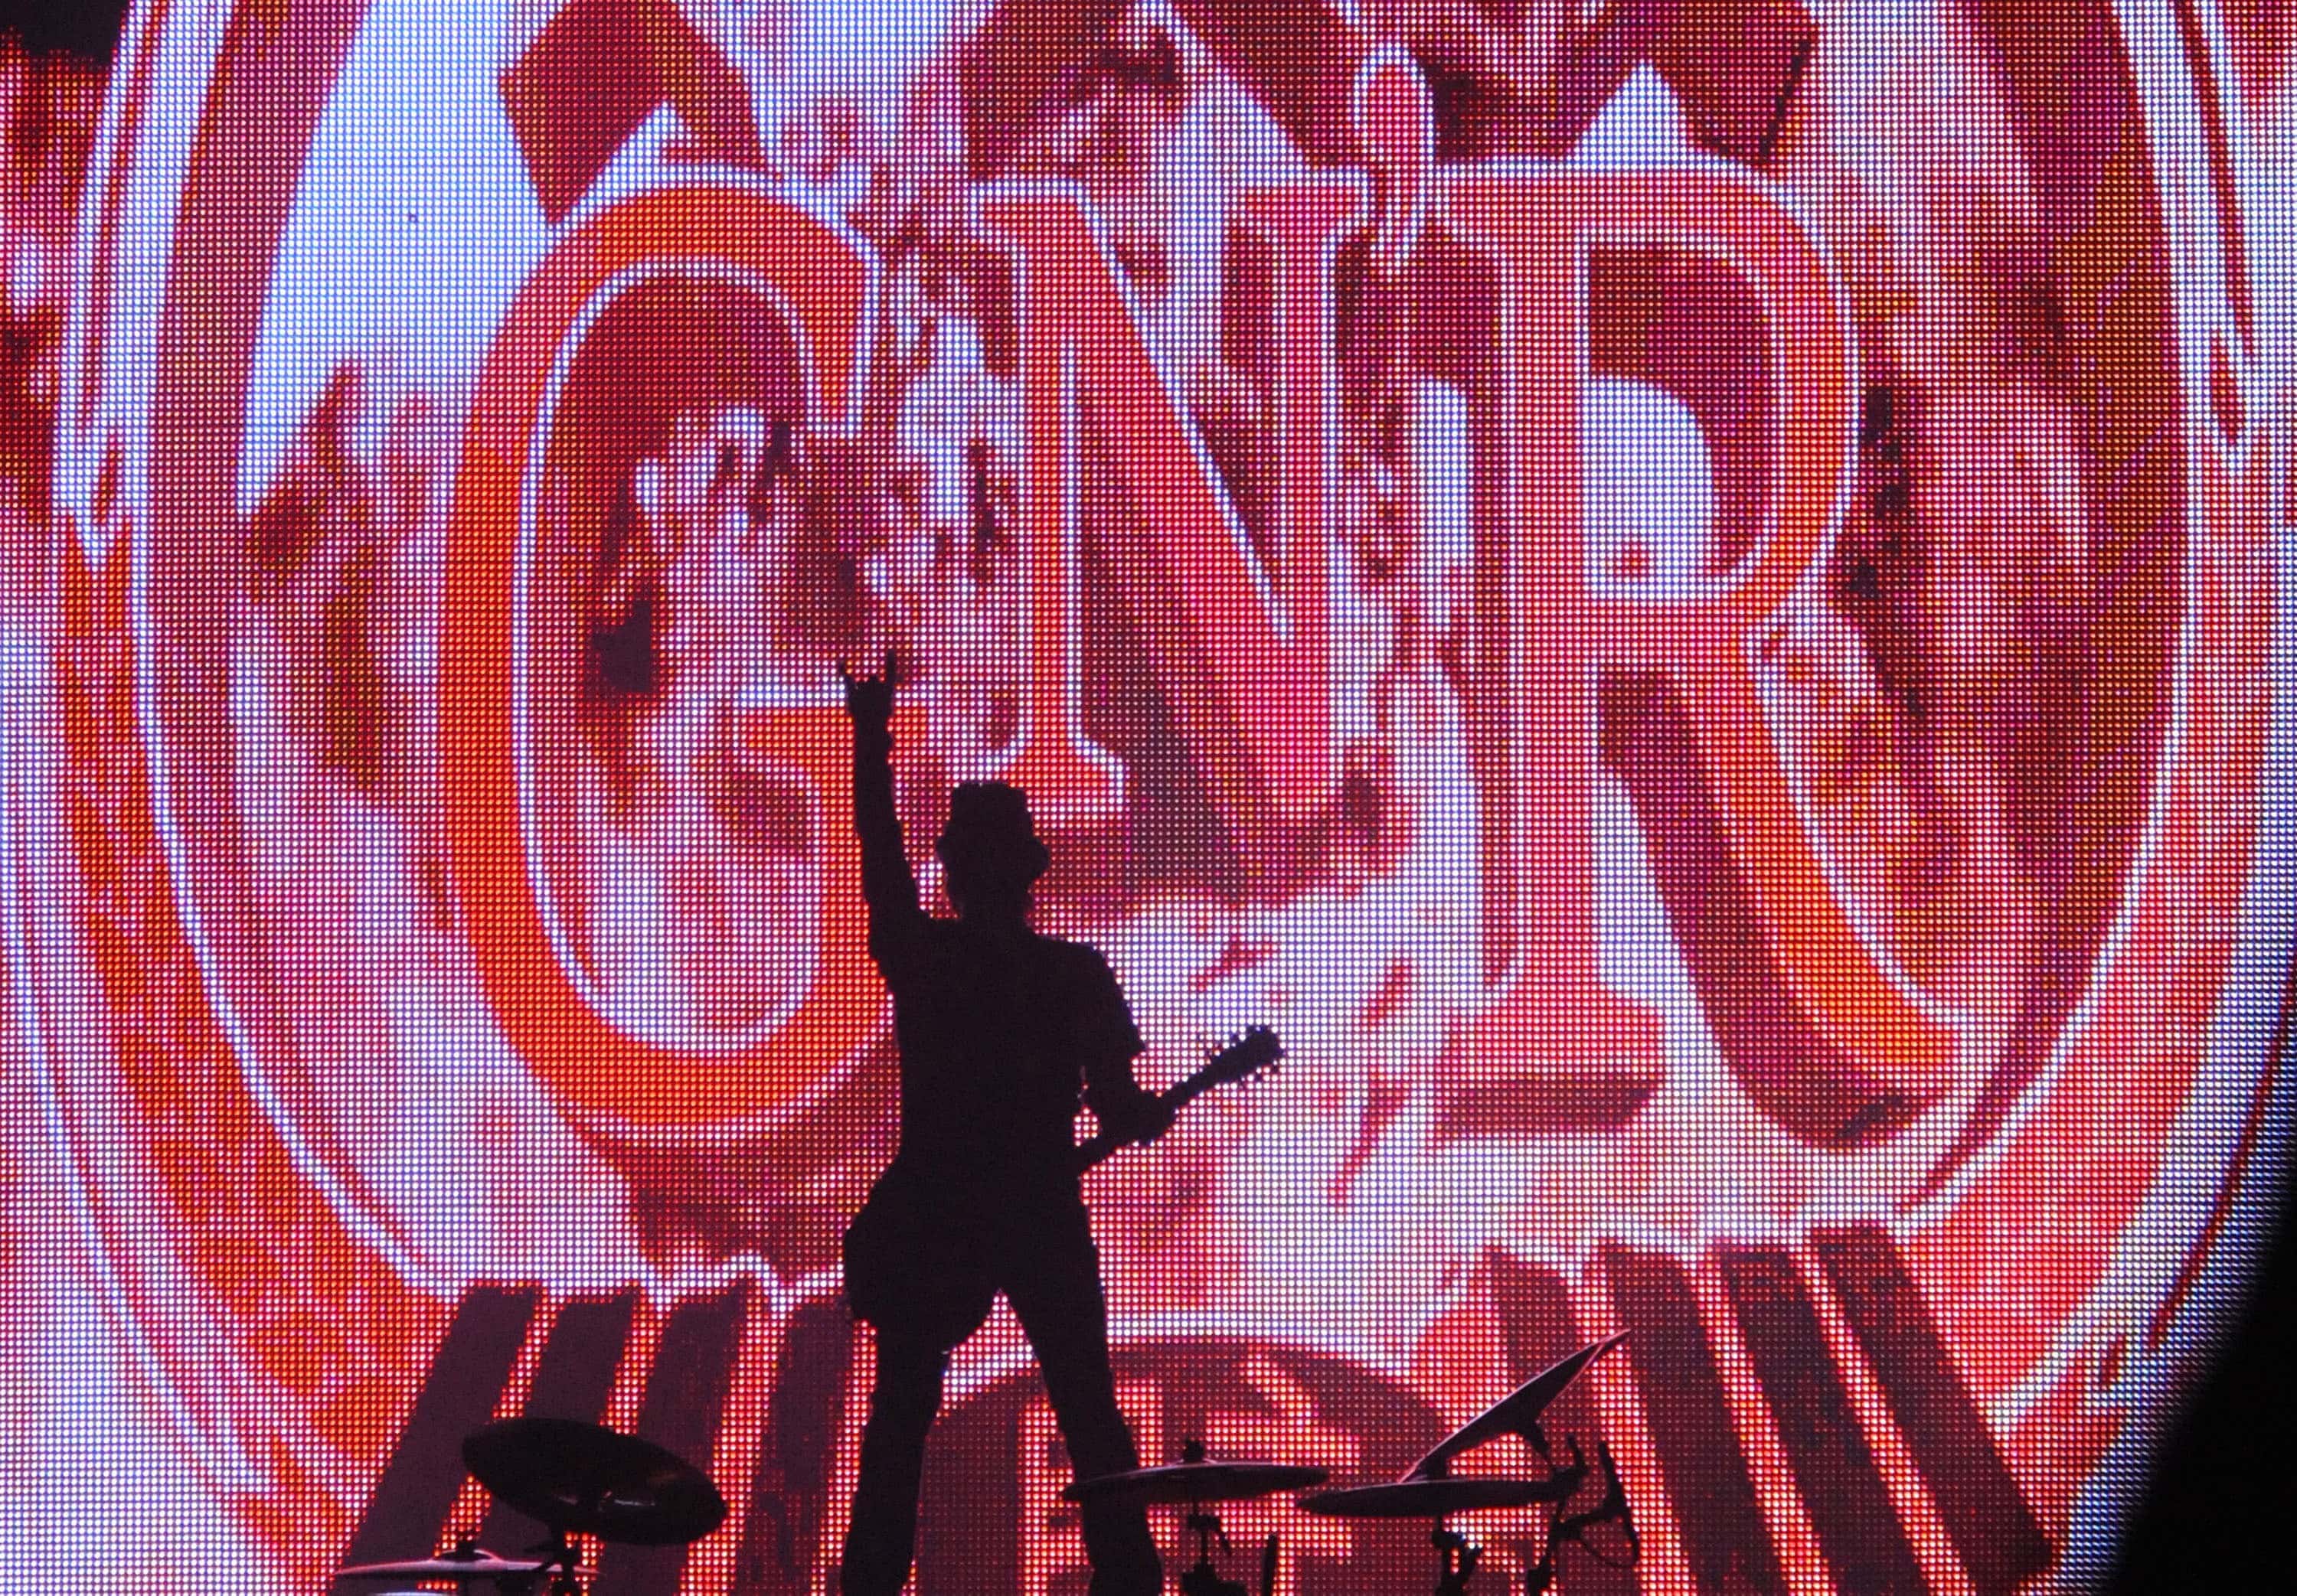 5 Facts About Guns N' Roses - Roadie Music Blog